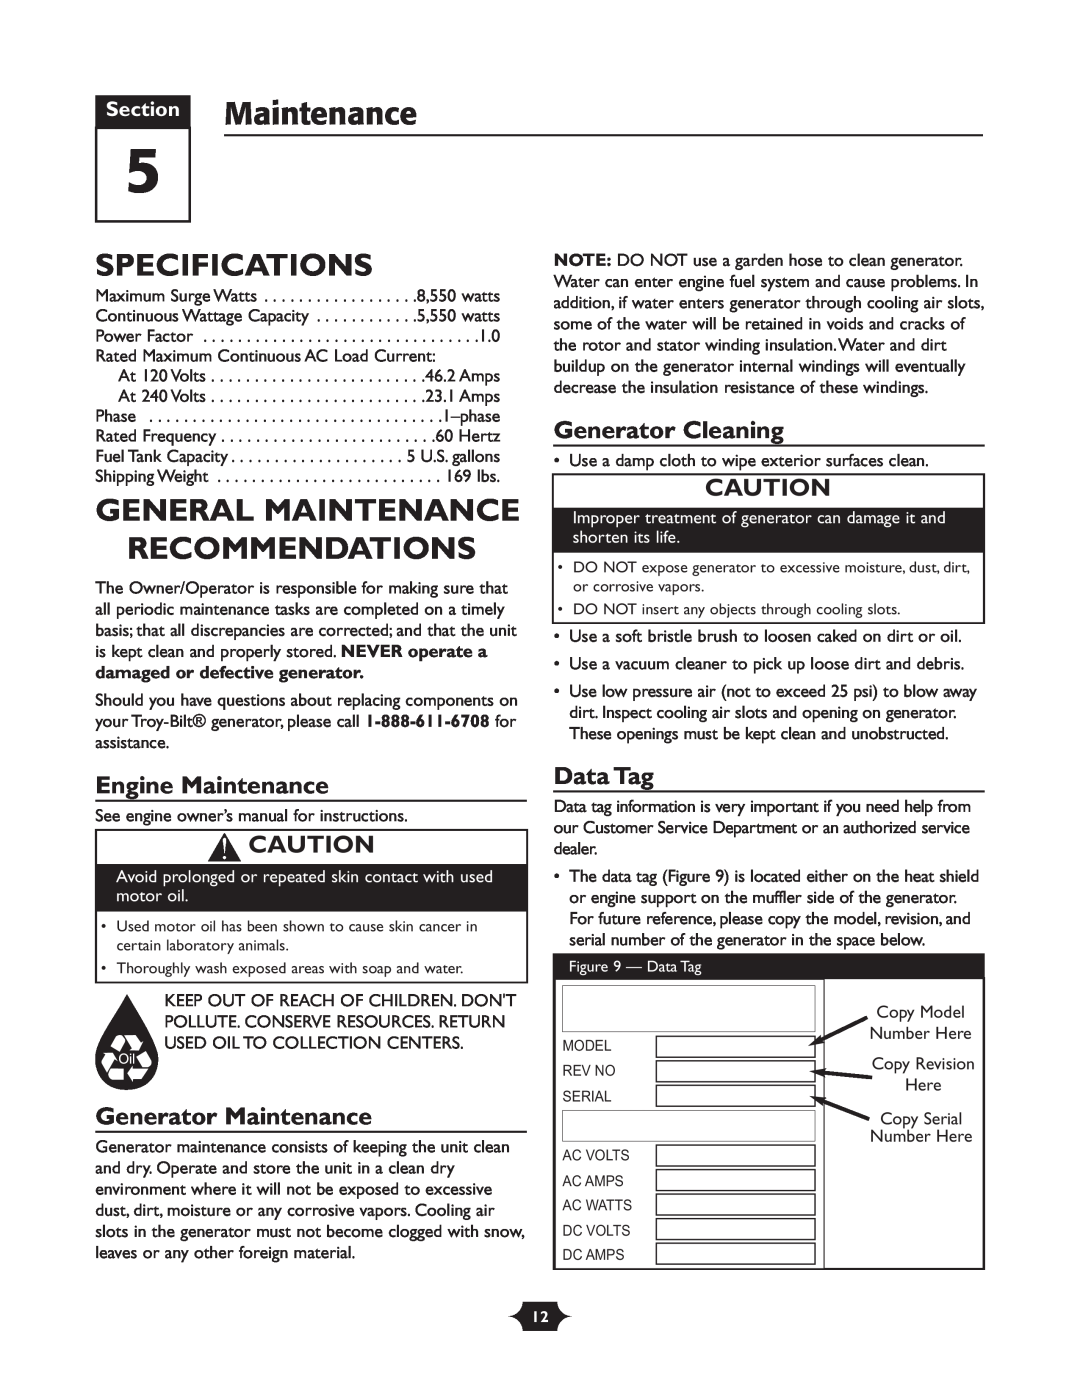 Troy-Bilt 1919 Section Maintenance, Specifications, General Maintenance Recommendations, Generator Cleaning, Data Tag 